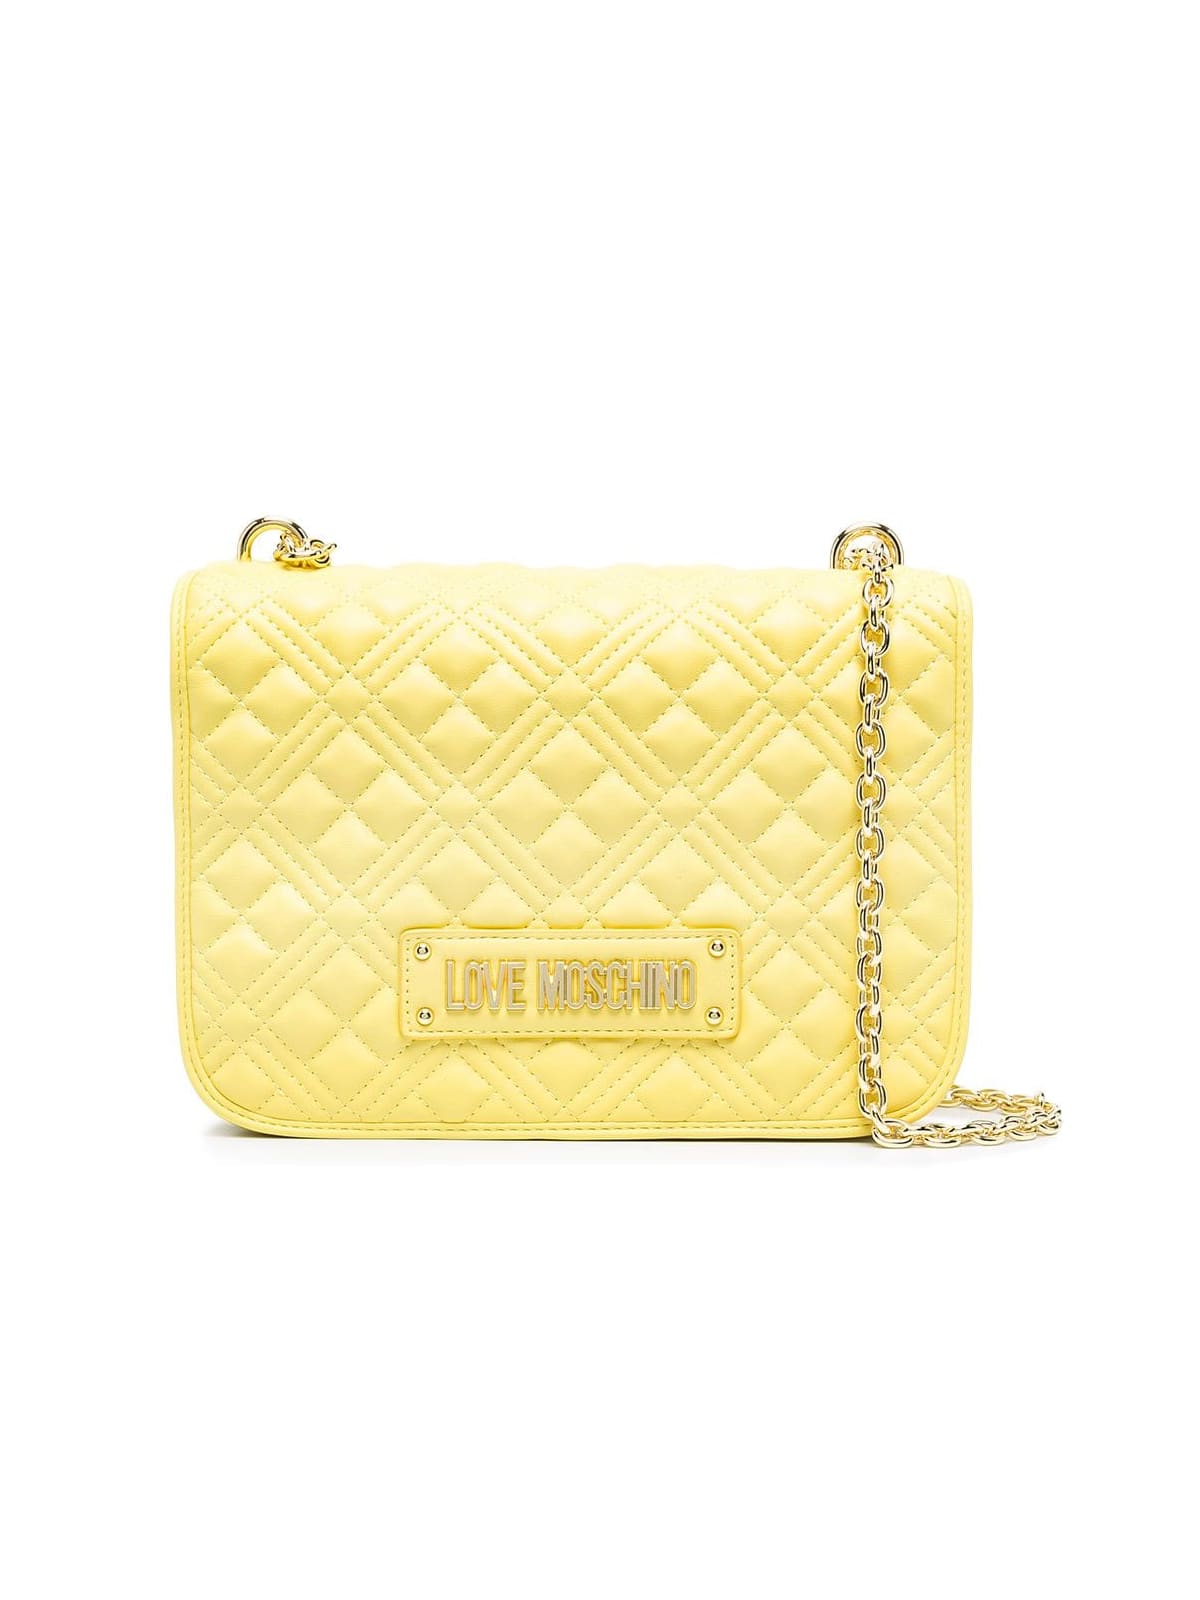 Love Moschino Quilted Nappa Pu Shoulder Bag